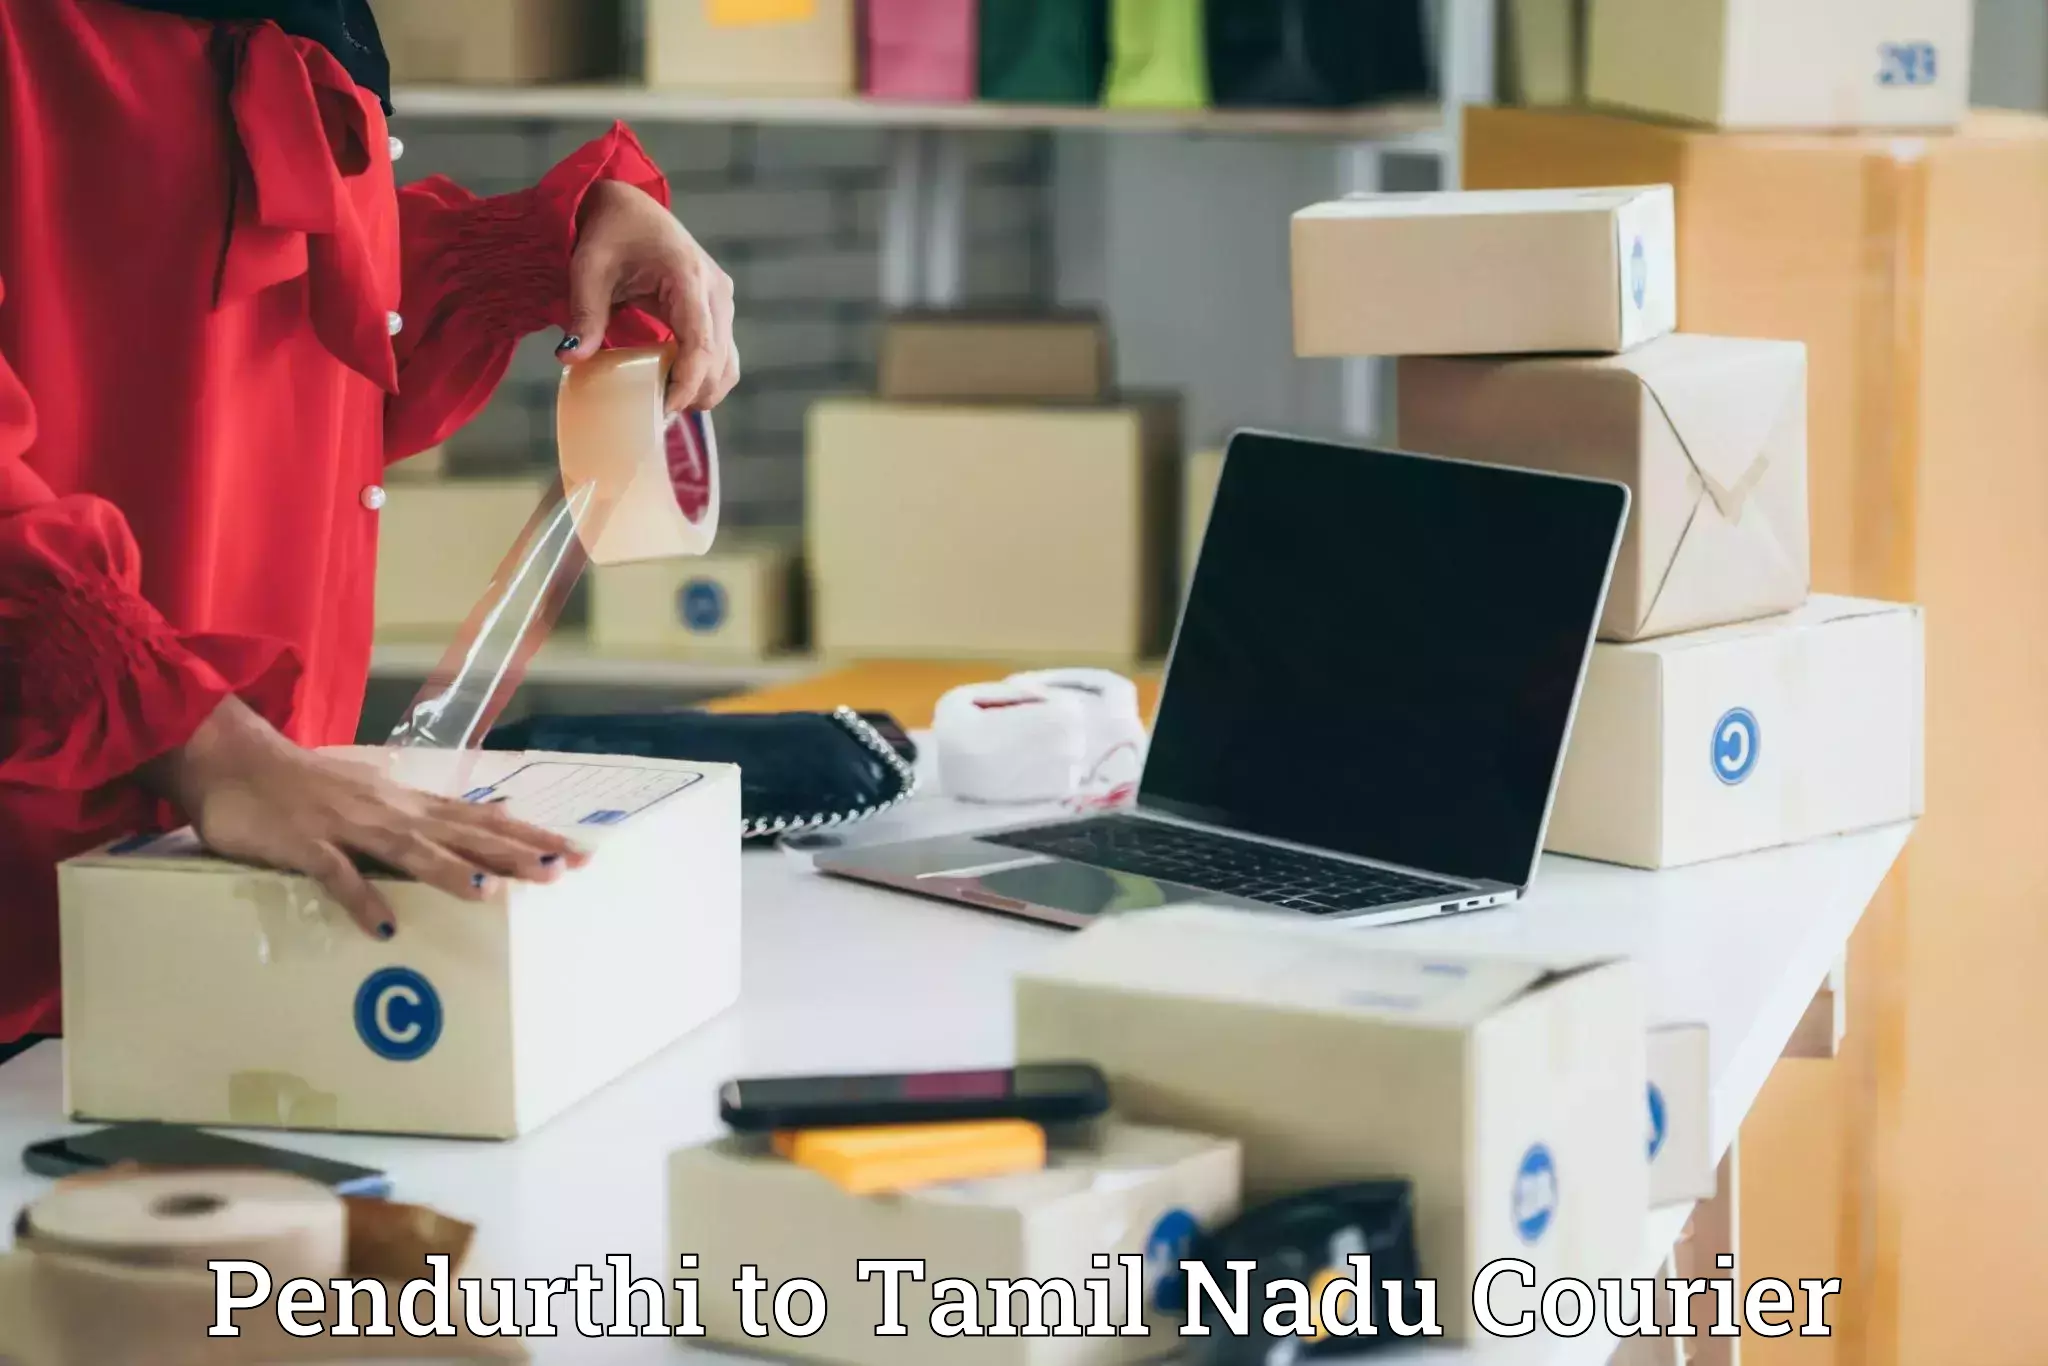 Sustainable delivery practices in Pendurthi to Tamil Nadu